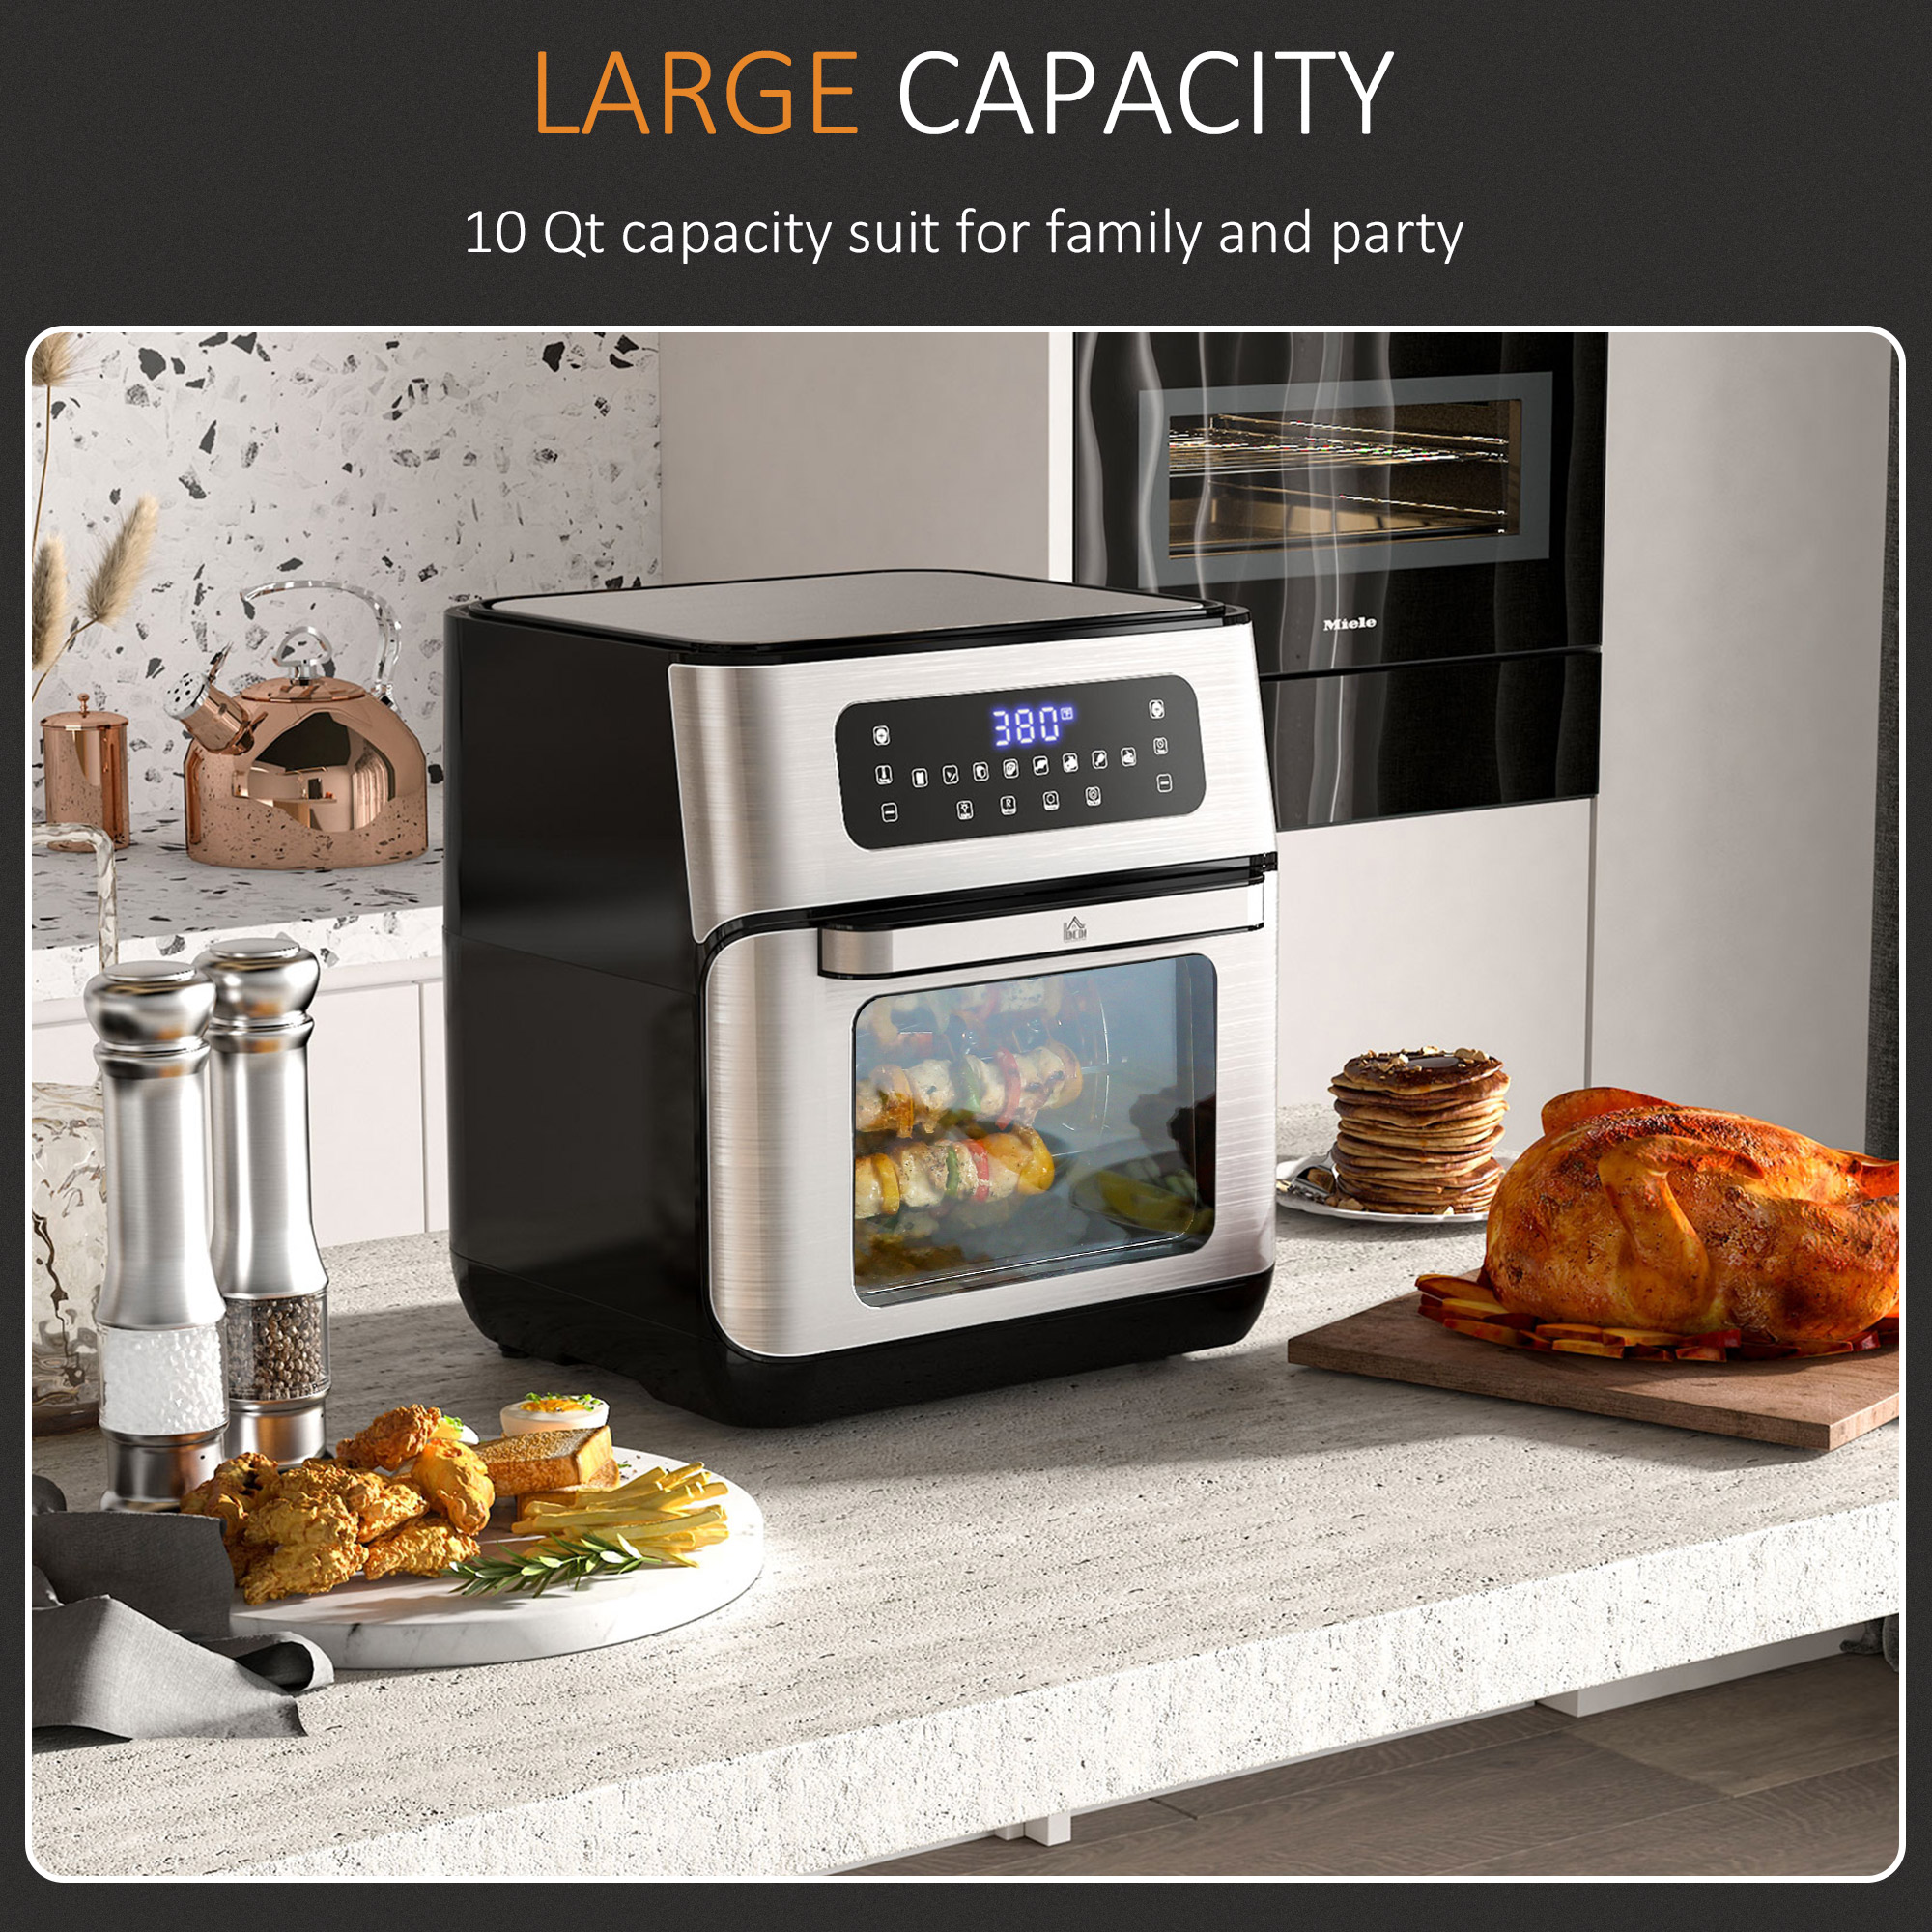 8-in-1 Toaster Oven Air Fryer, 6-Slice Compact Toaster Ovens Countertop-6  Rapid Quartz Heaters, Air Fry, Grill,roast,broil, Bake,dehydrate,…